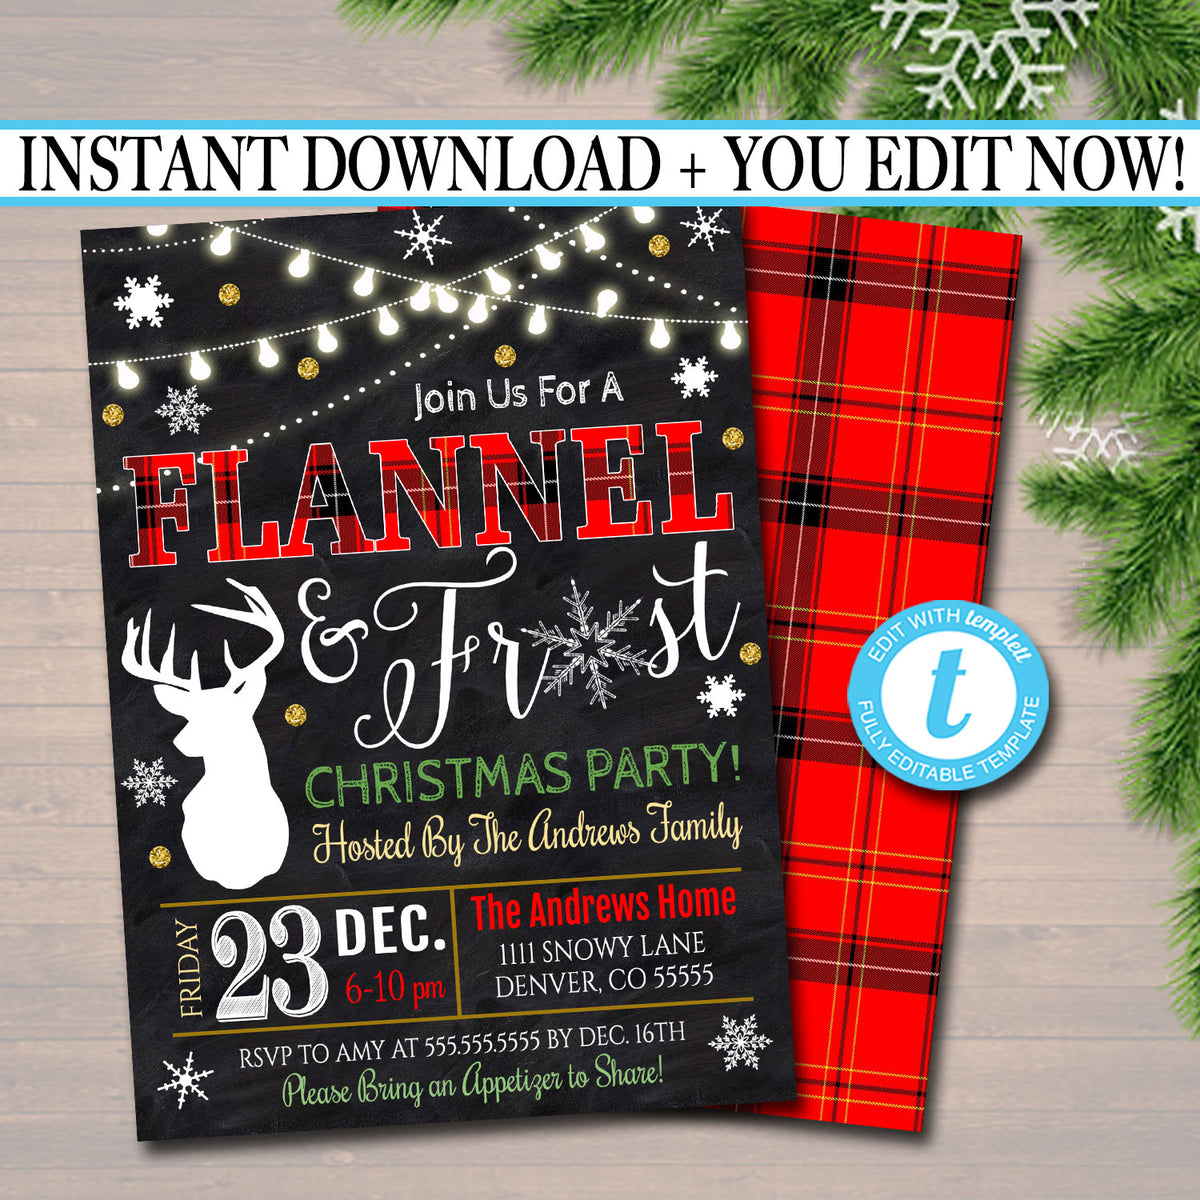 flannel-and-frost-party-invitation-tidylady-printables